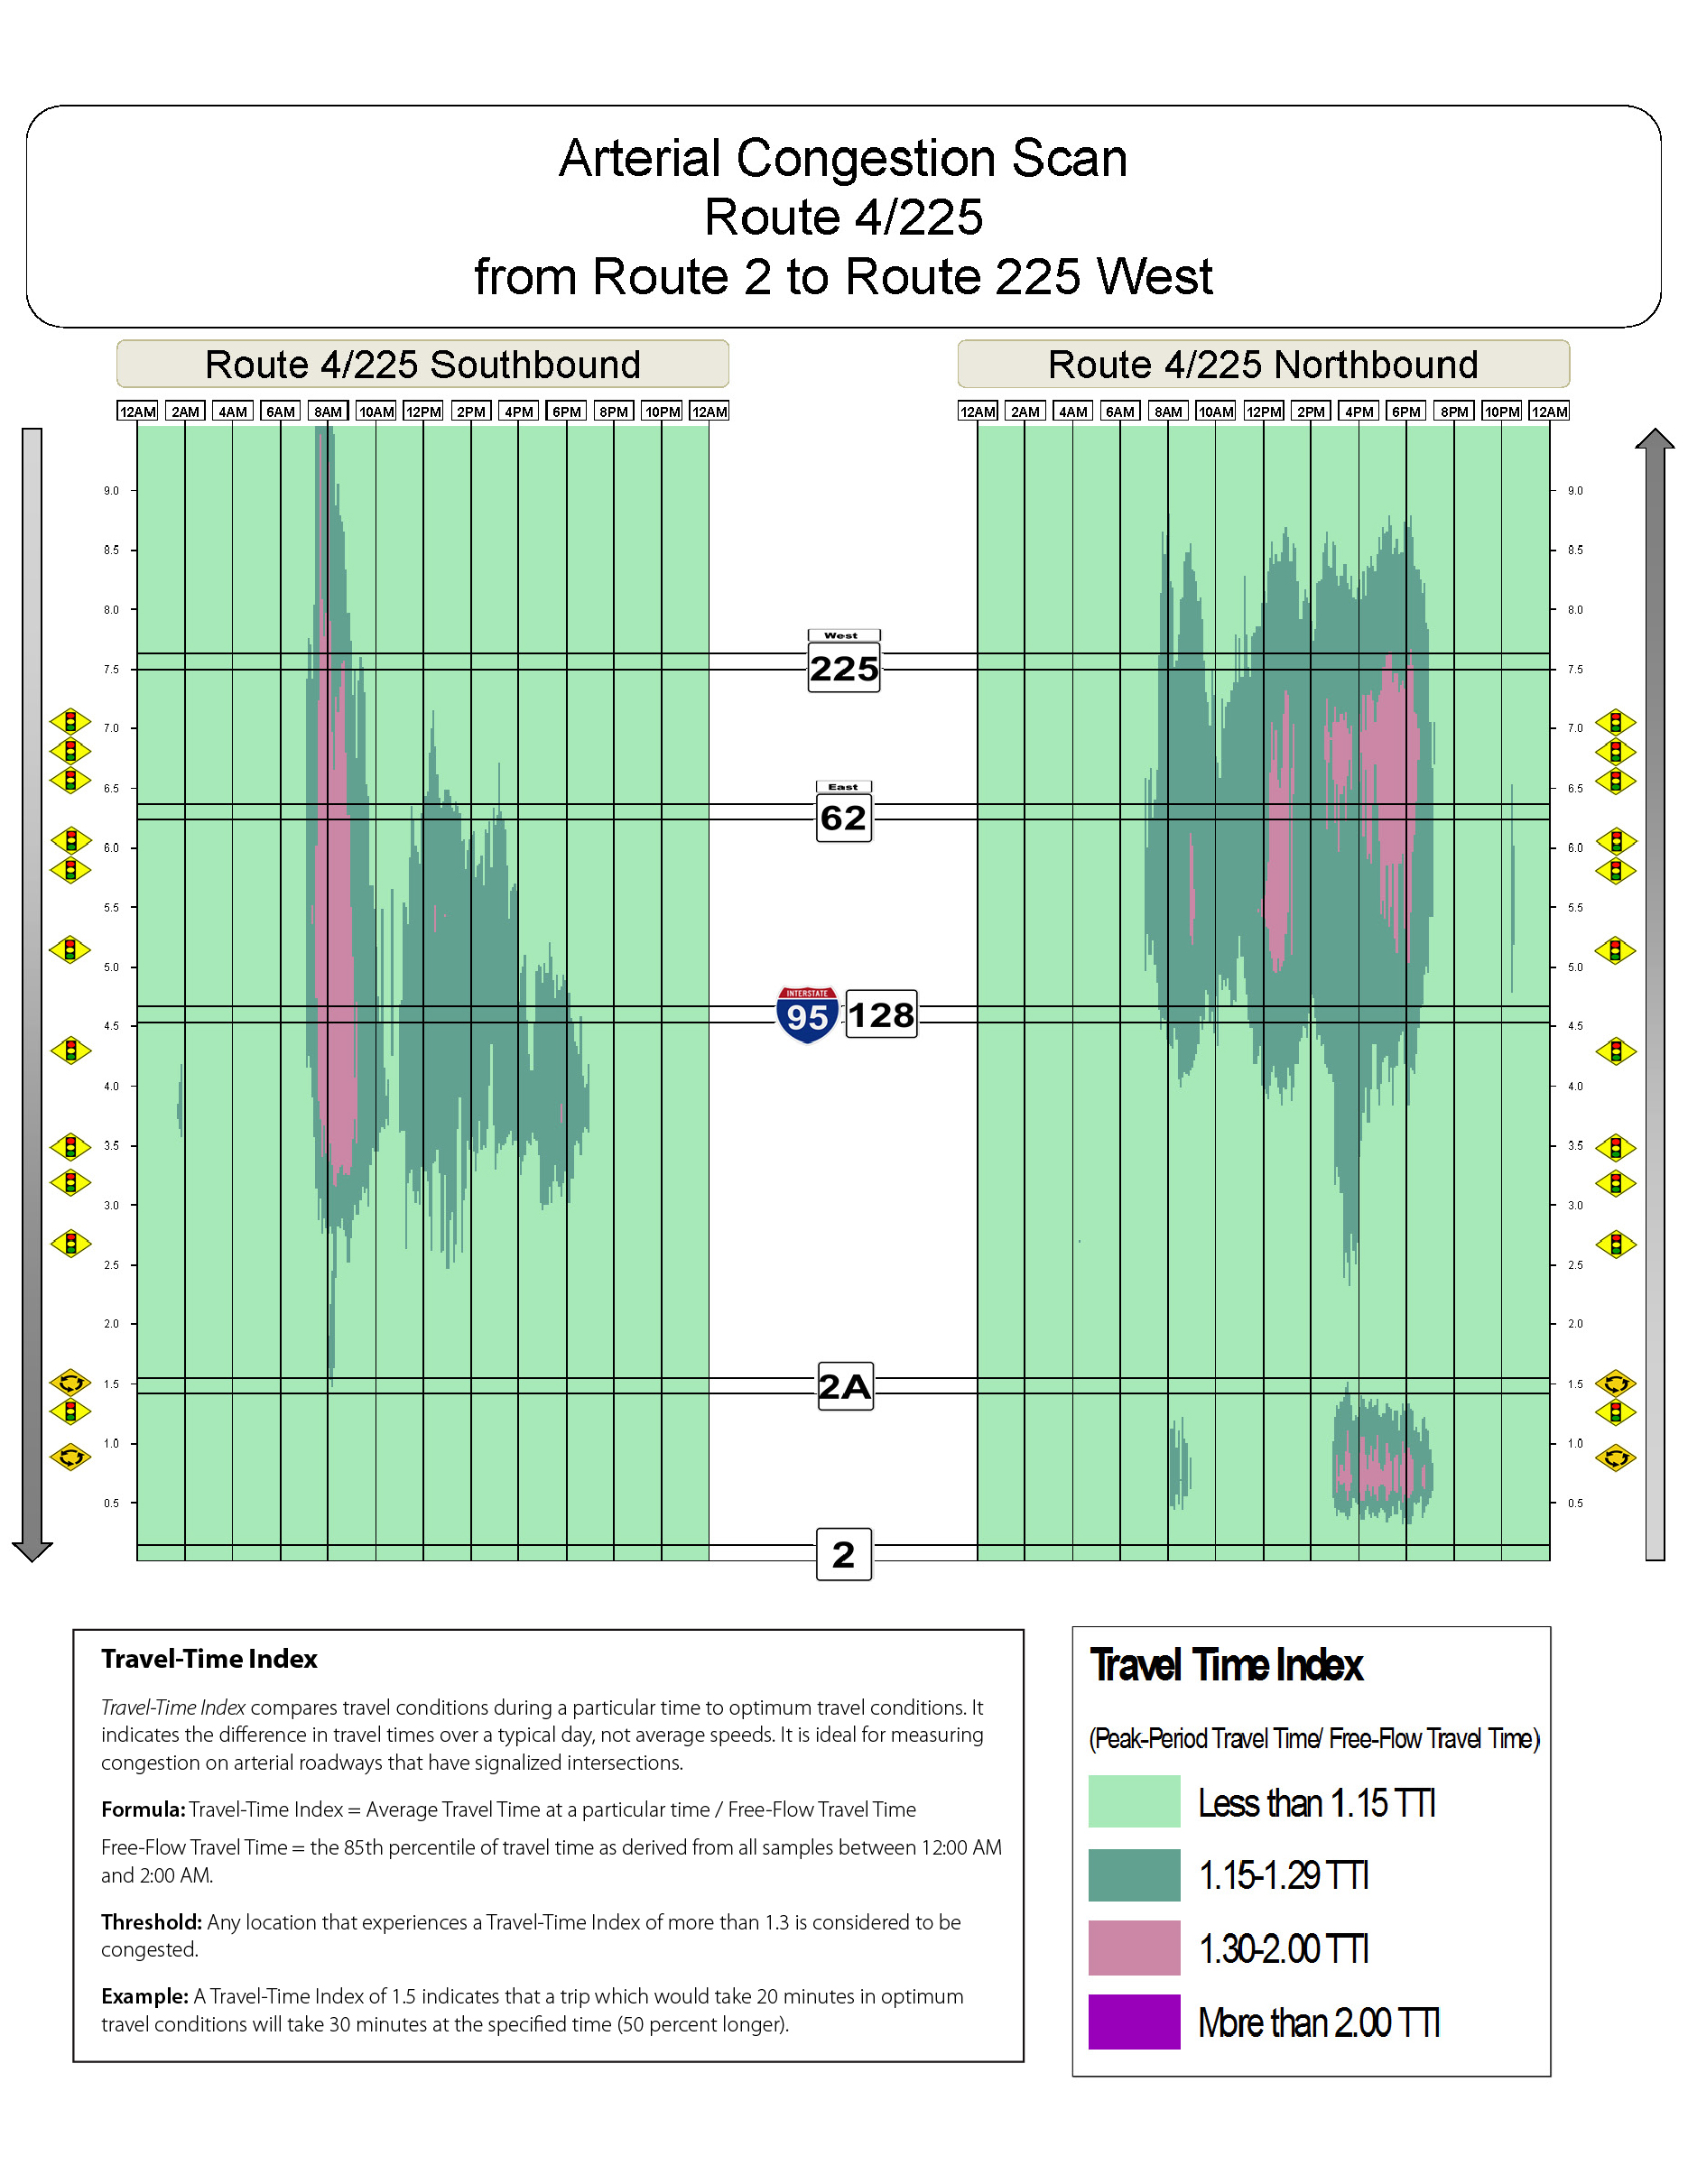 Congestion scan for Routes 4 and 225.